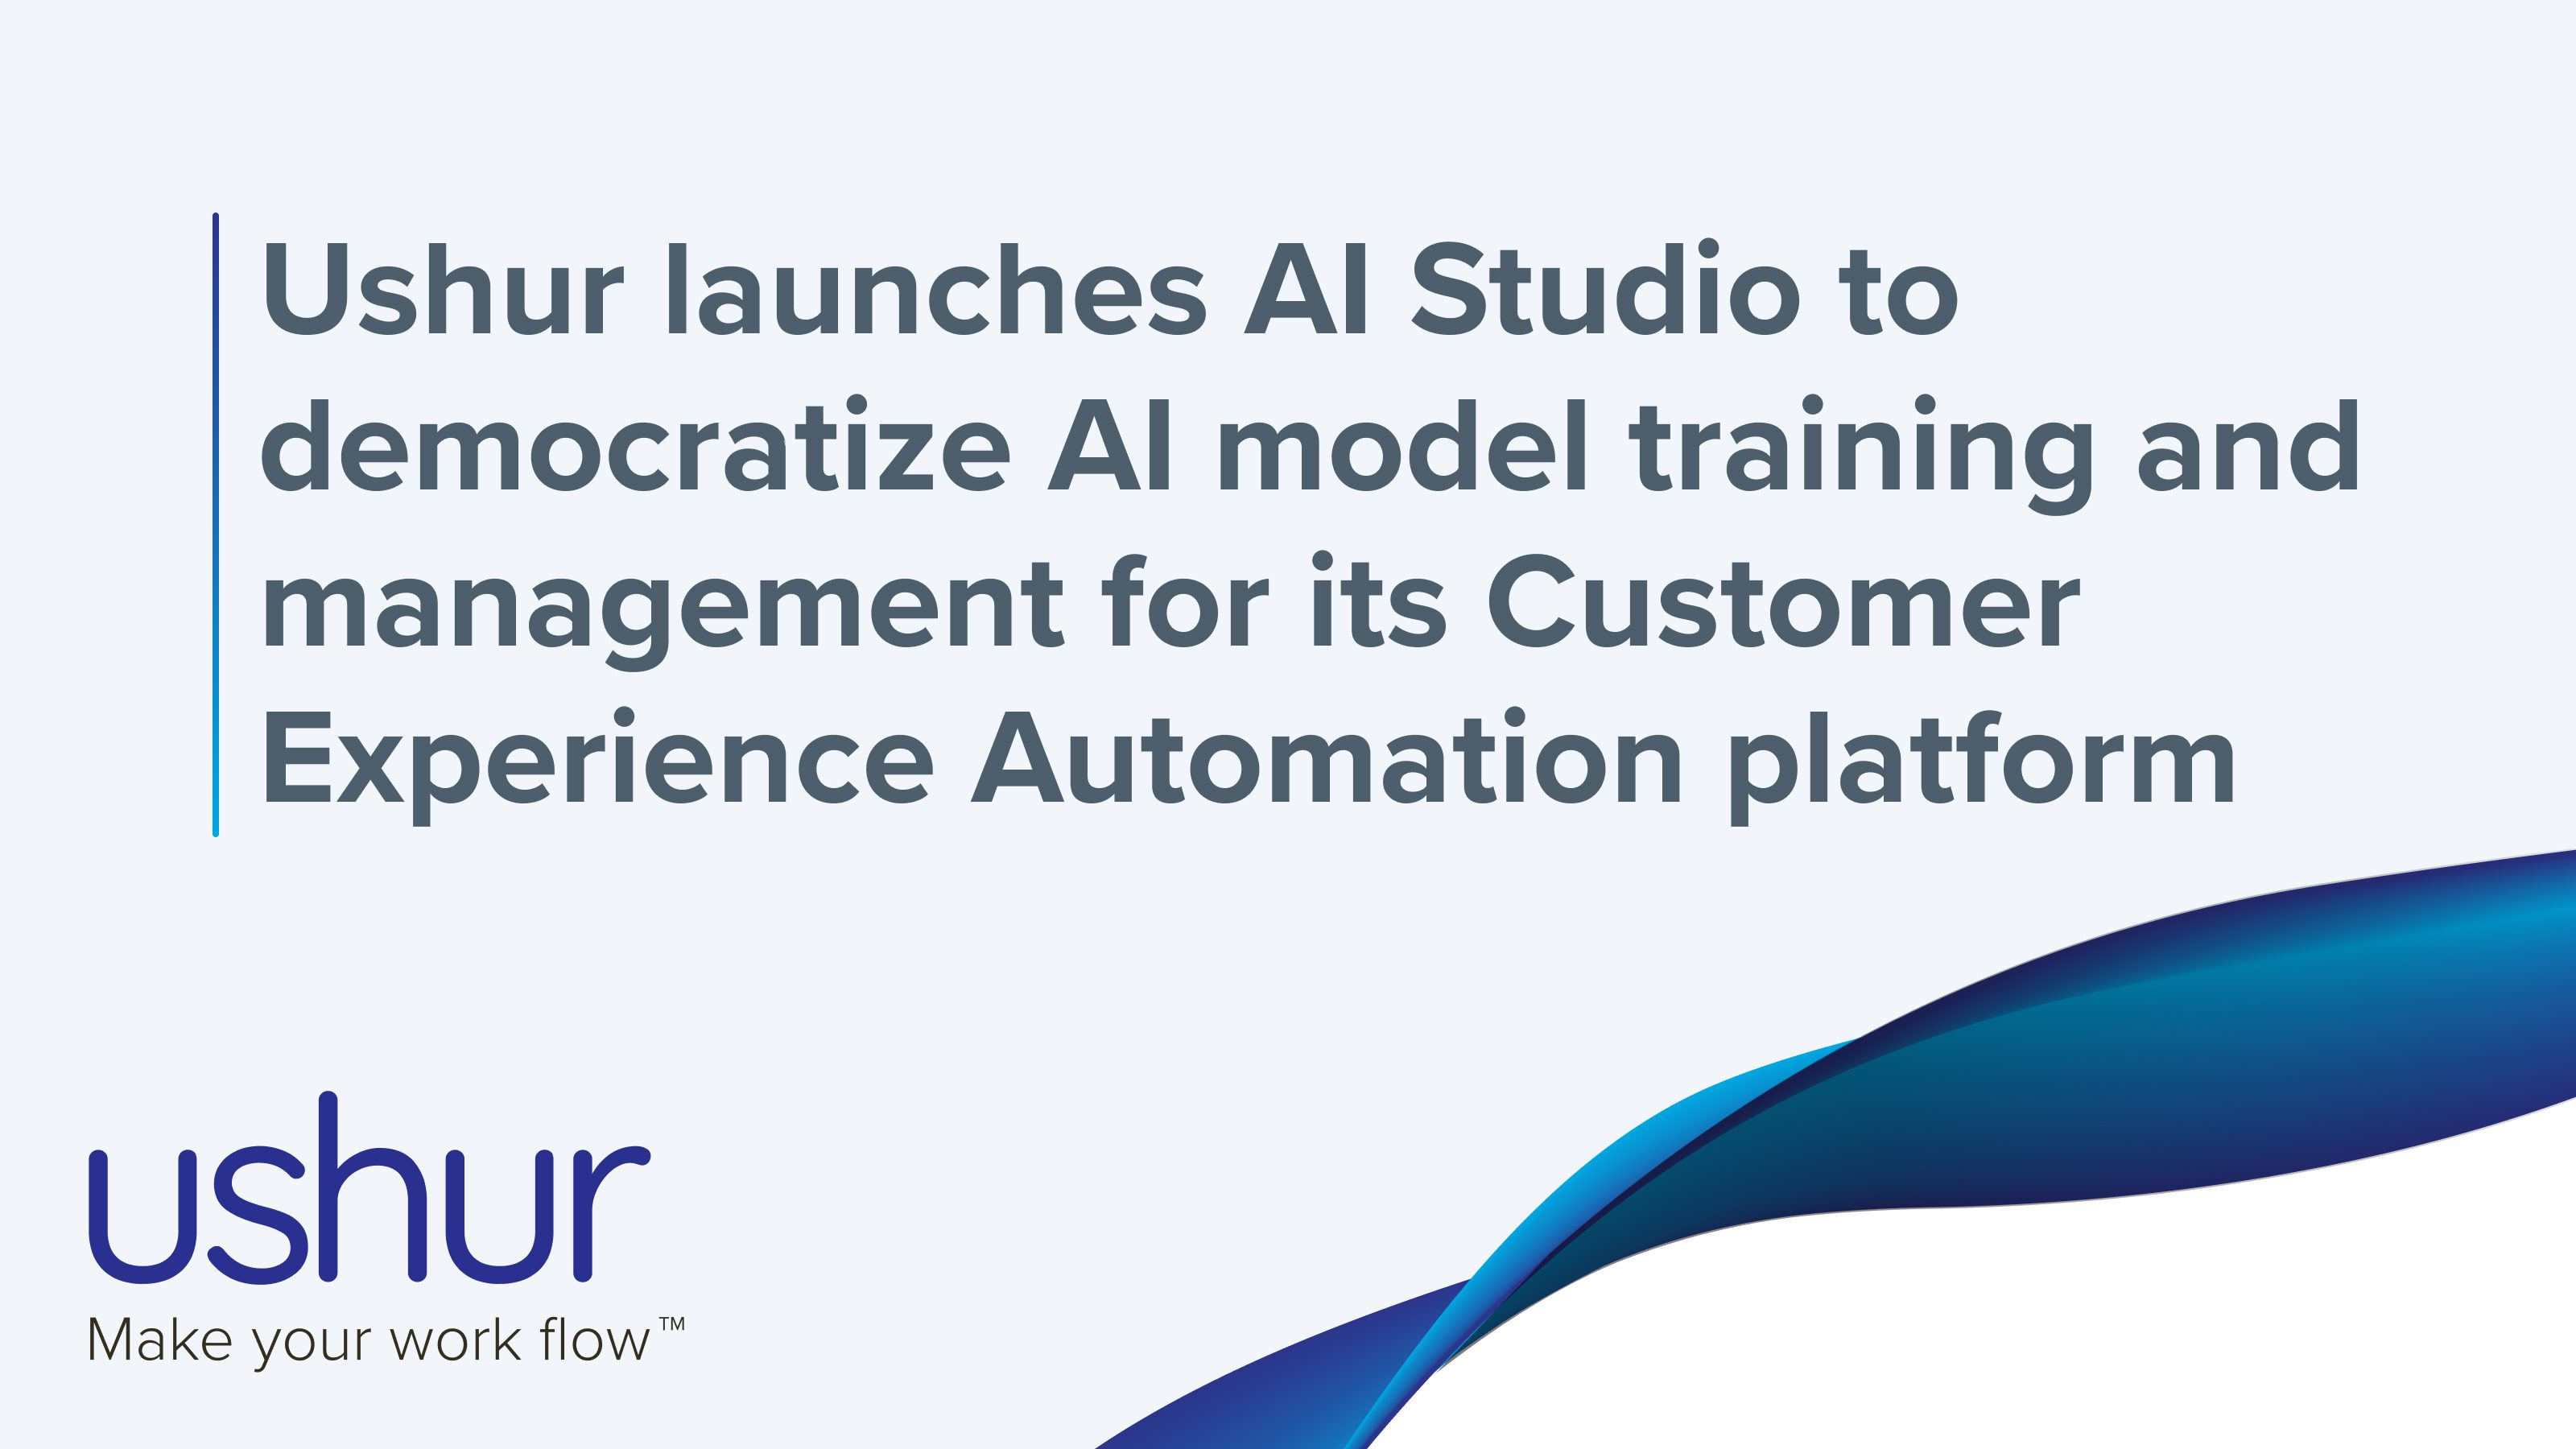 Ushur launches AI Studio to democratize AI model training and management for its Customer Experience Automation platform